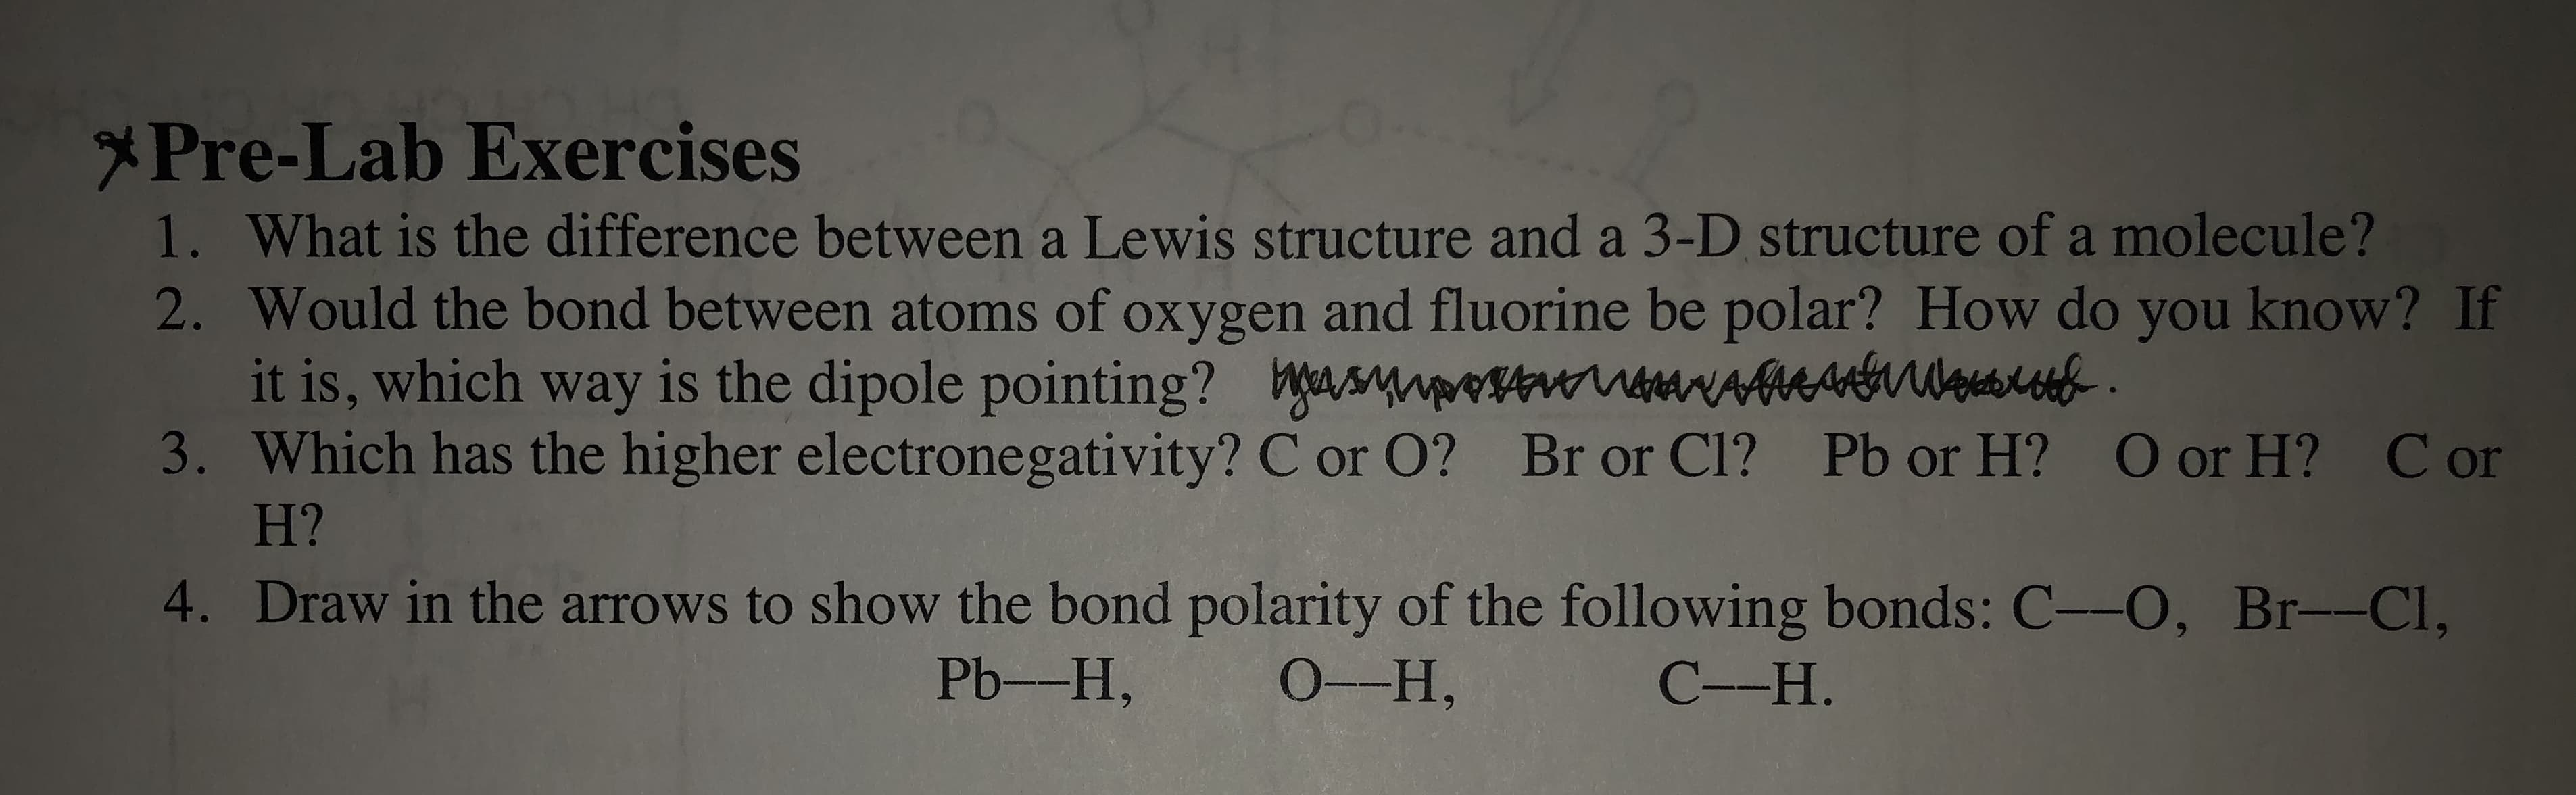 Pre-Lab Exercises
1. What is the difference between a Lewis structure and a 3-D structure of a molecule ?
2. Would the bond between atoms of oxygen and fluorine be polar? How do you know? If
it is, which way is the dipole pointing? Wss aeA l
3. Which has the higher electronegativity? C or O? Br or Cl? Pb or H? O or H? Cor
H?
4. Draw in the arrows to show the bond polarity of the following bonds: C--O, Br--Cl,
Pb--H,
0-Н,
С--Н.
